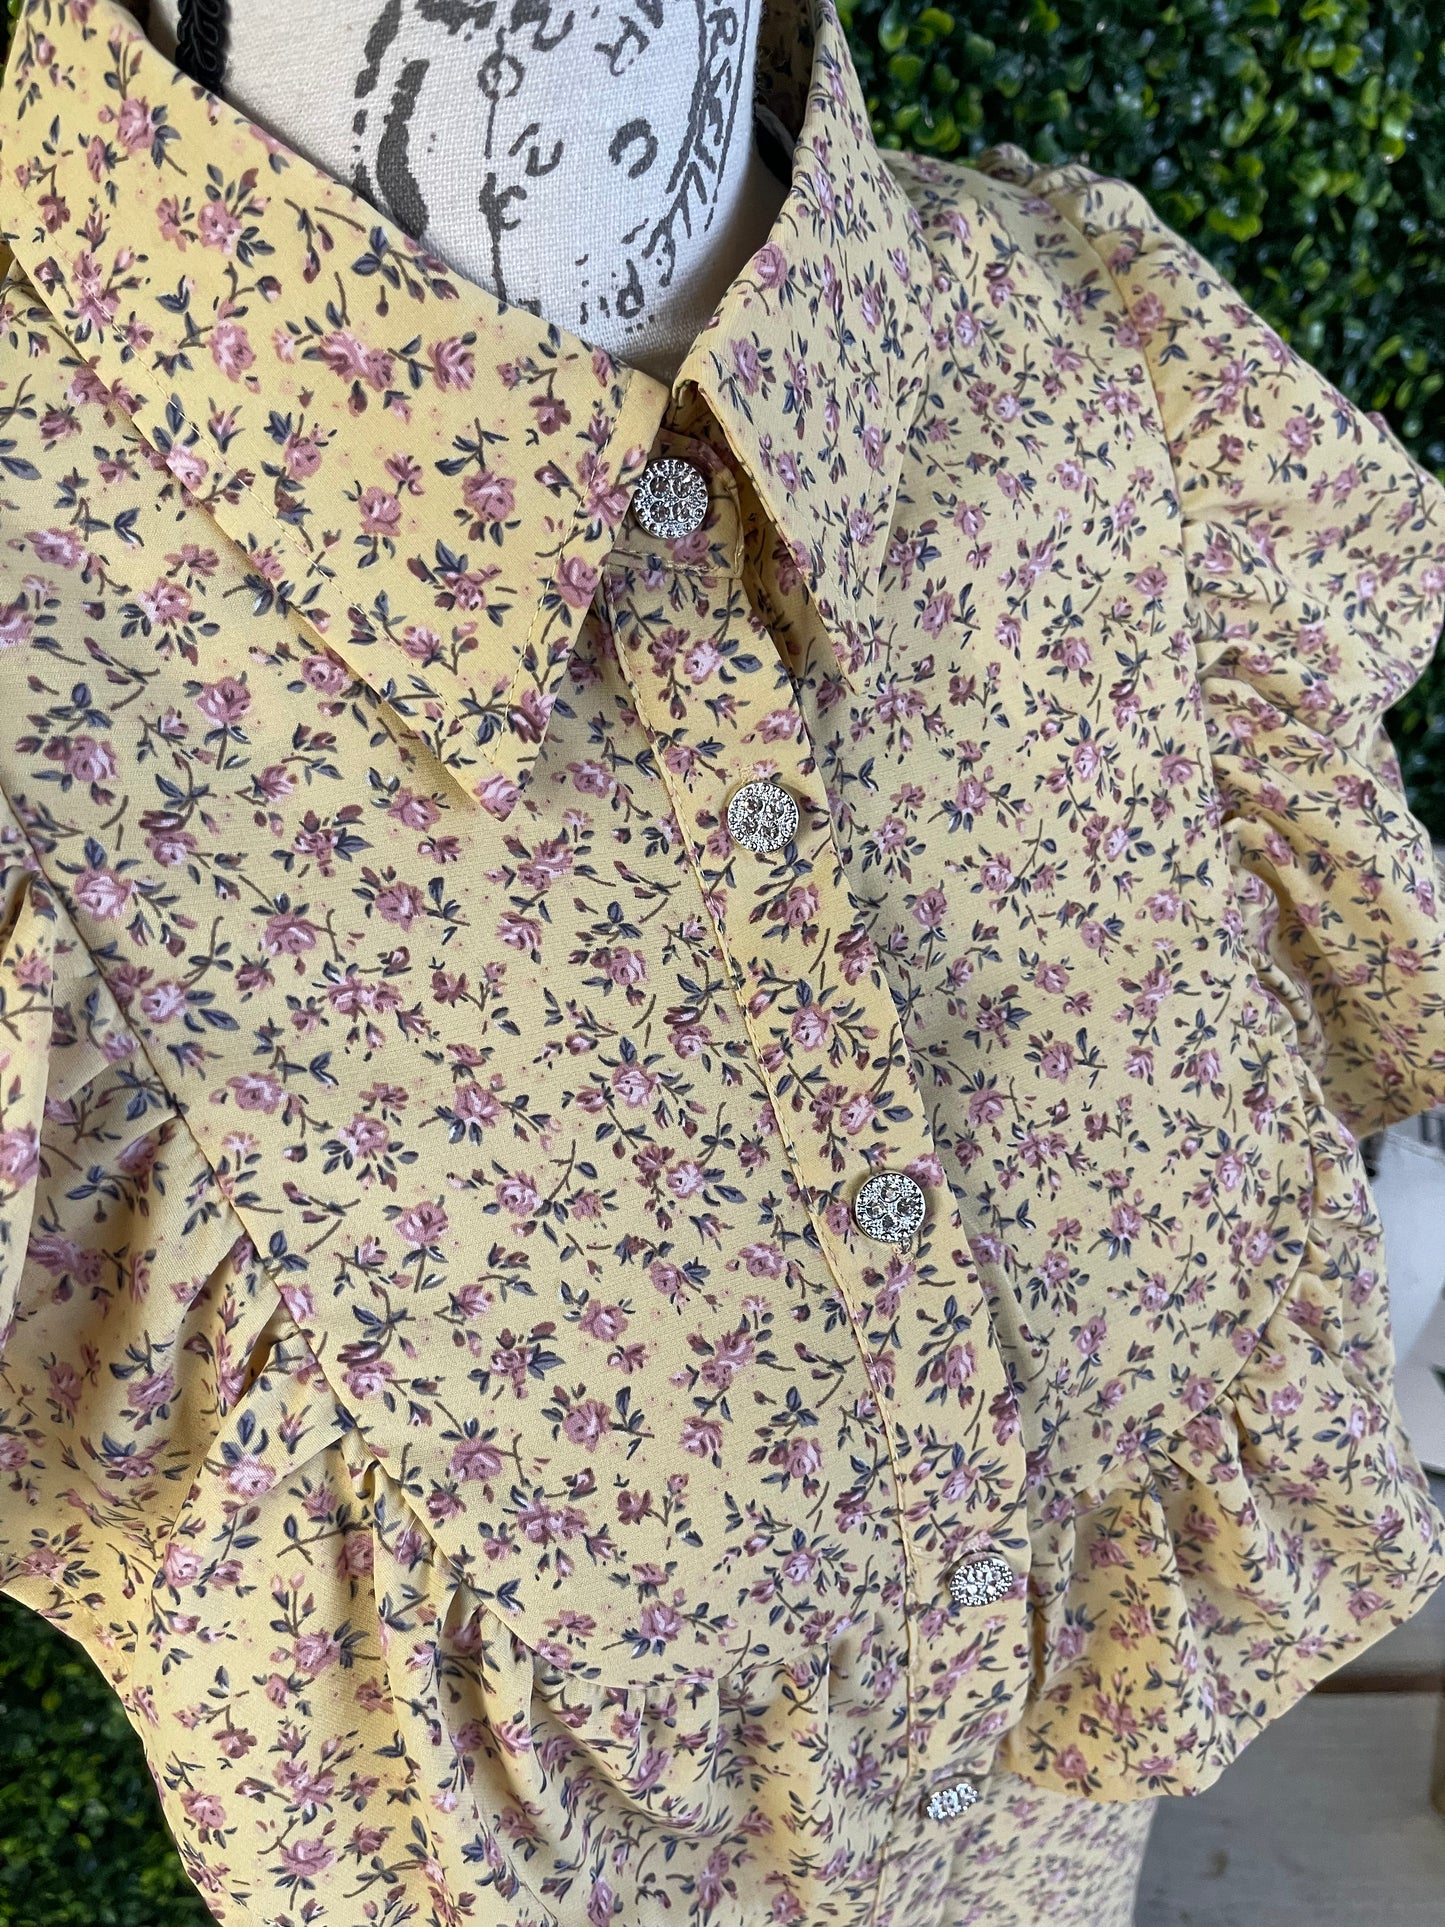 Western Bling Floral Button Up Top - Yellow